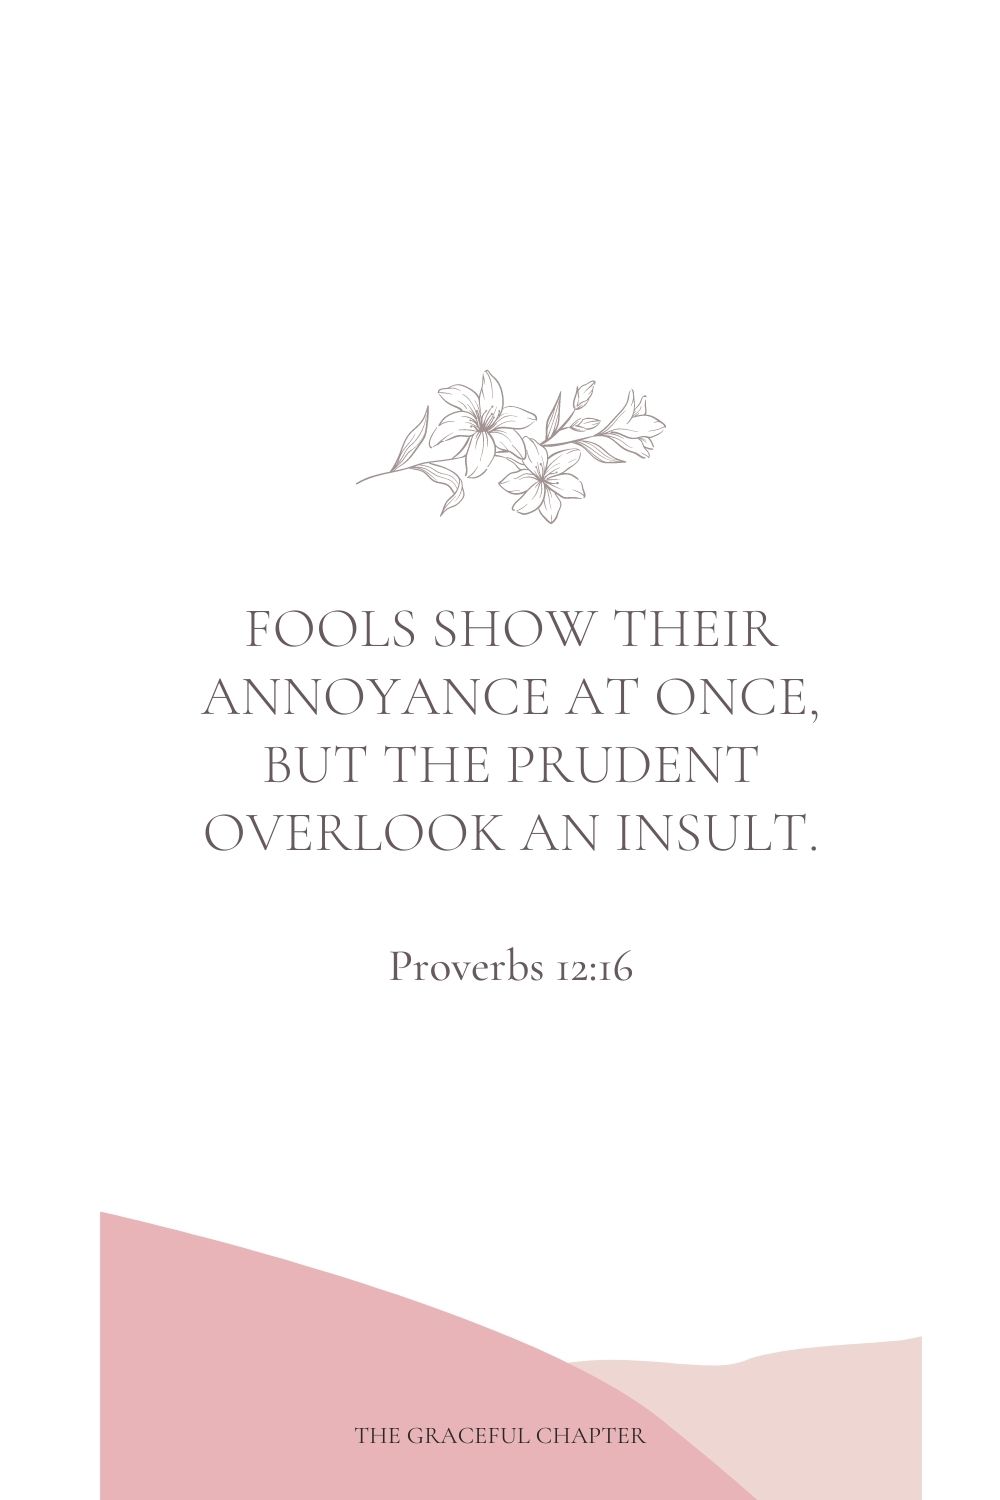 Fools show their annoyance at once, but the prudent overlook an insult. Proverbs 12:16